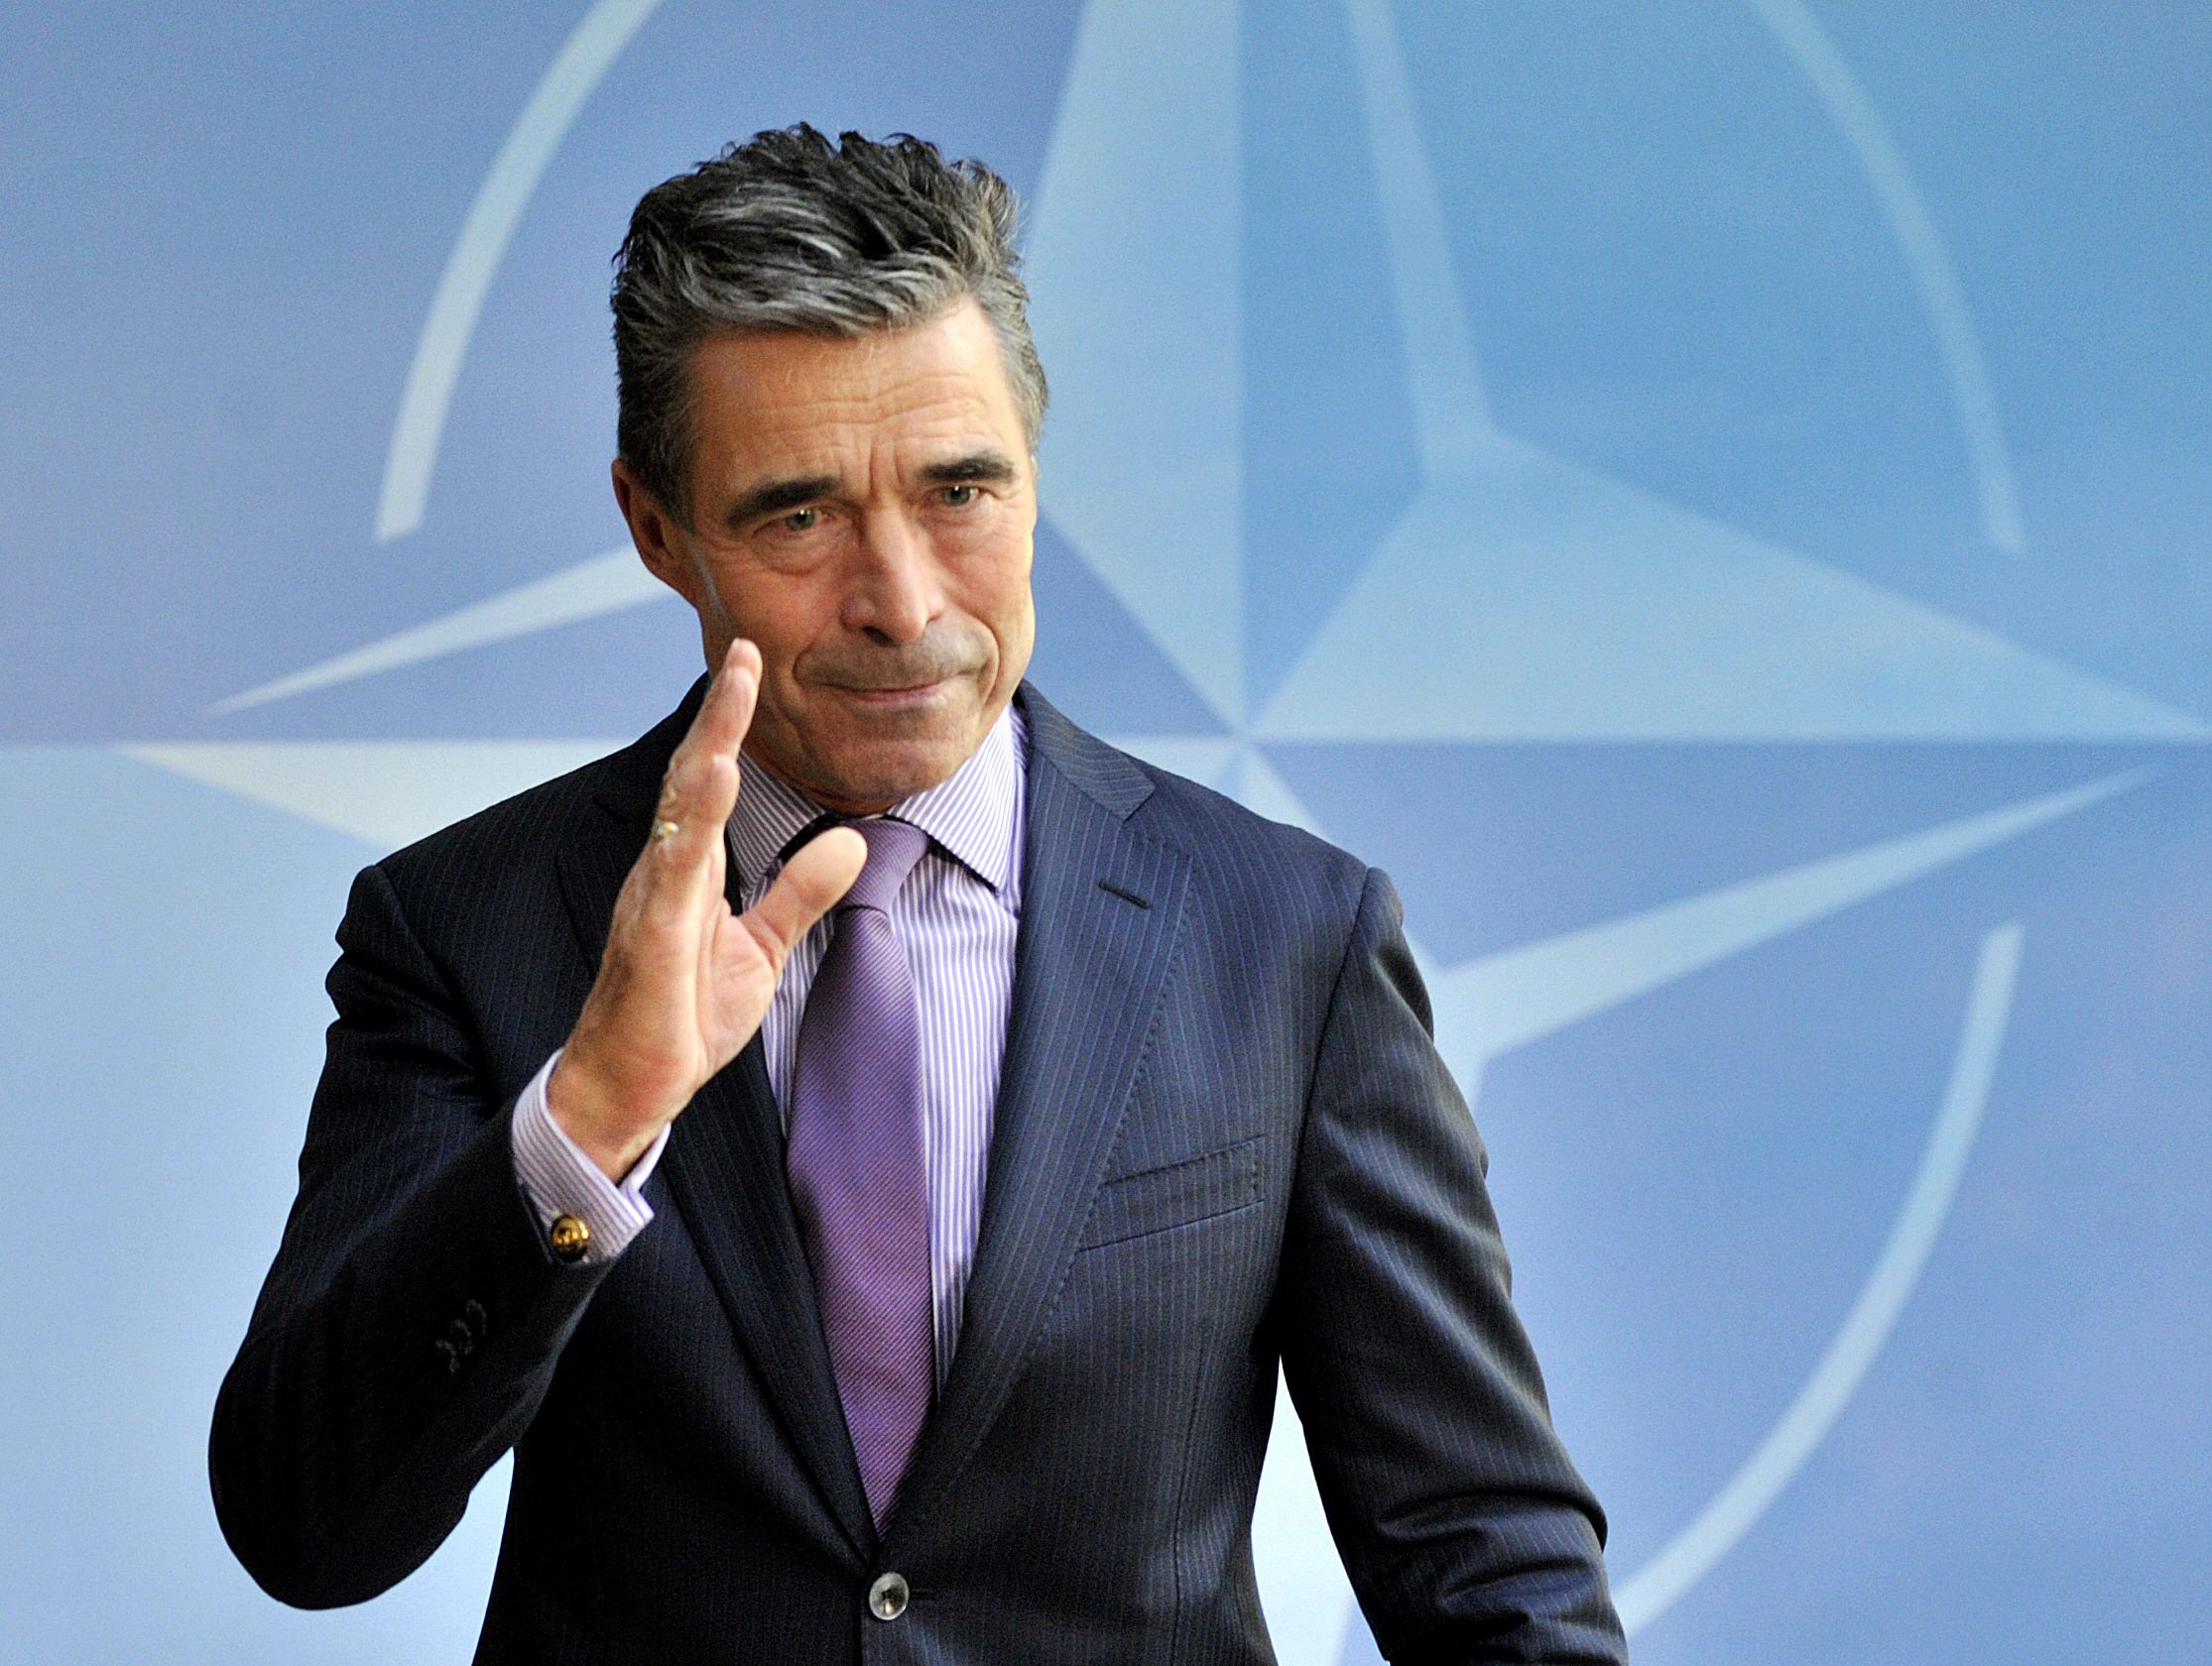 nato chief anders fogh rasmussen during a press conference on wednesday in brussels photo afp